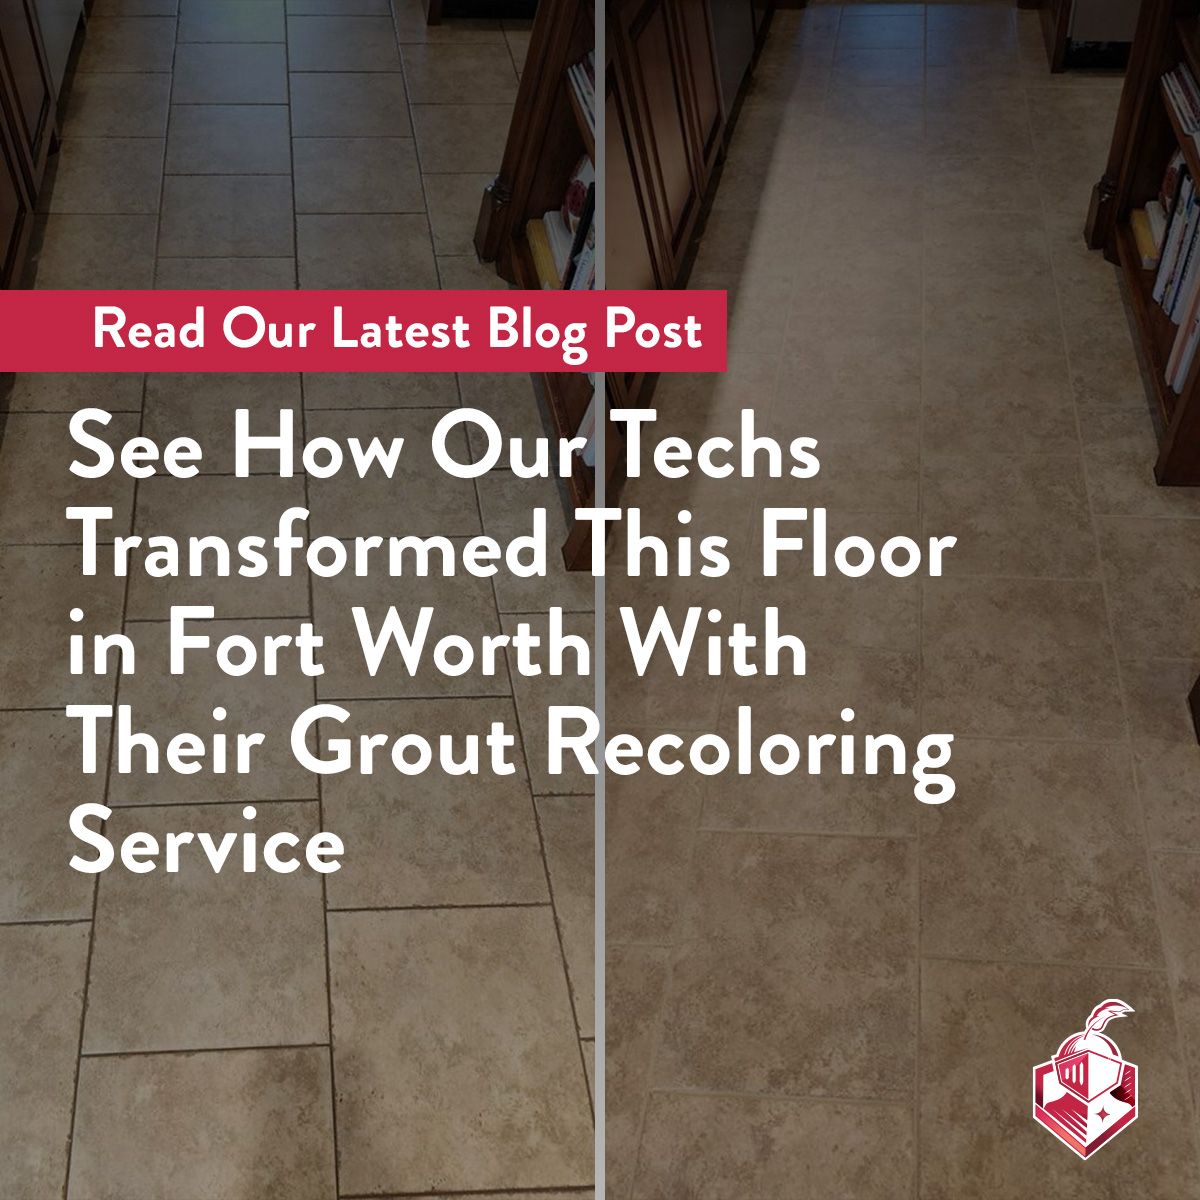 See How Our Techs Transformed This Floor in Fort Worth With Their Grout Recoloring Service